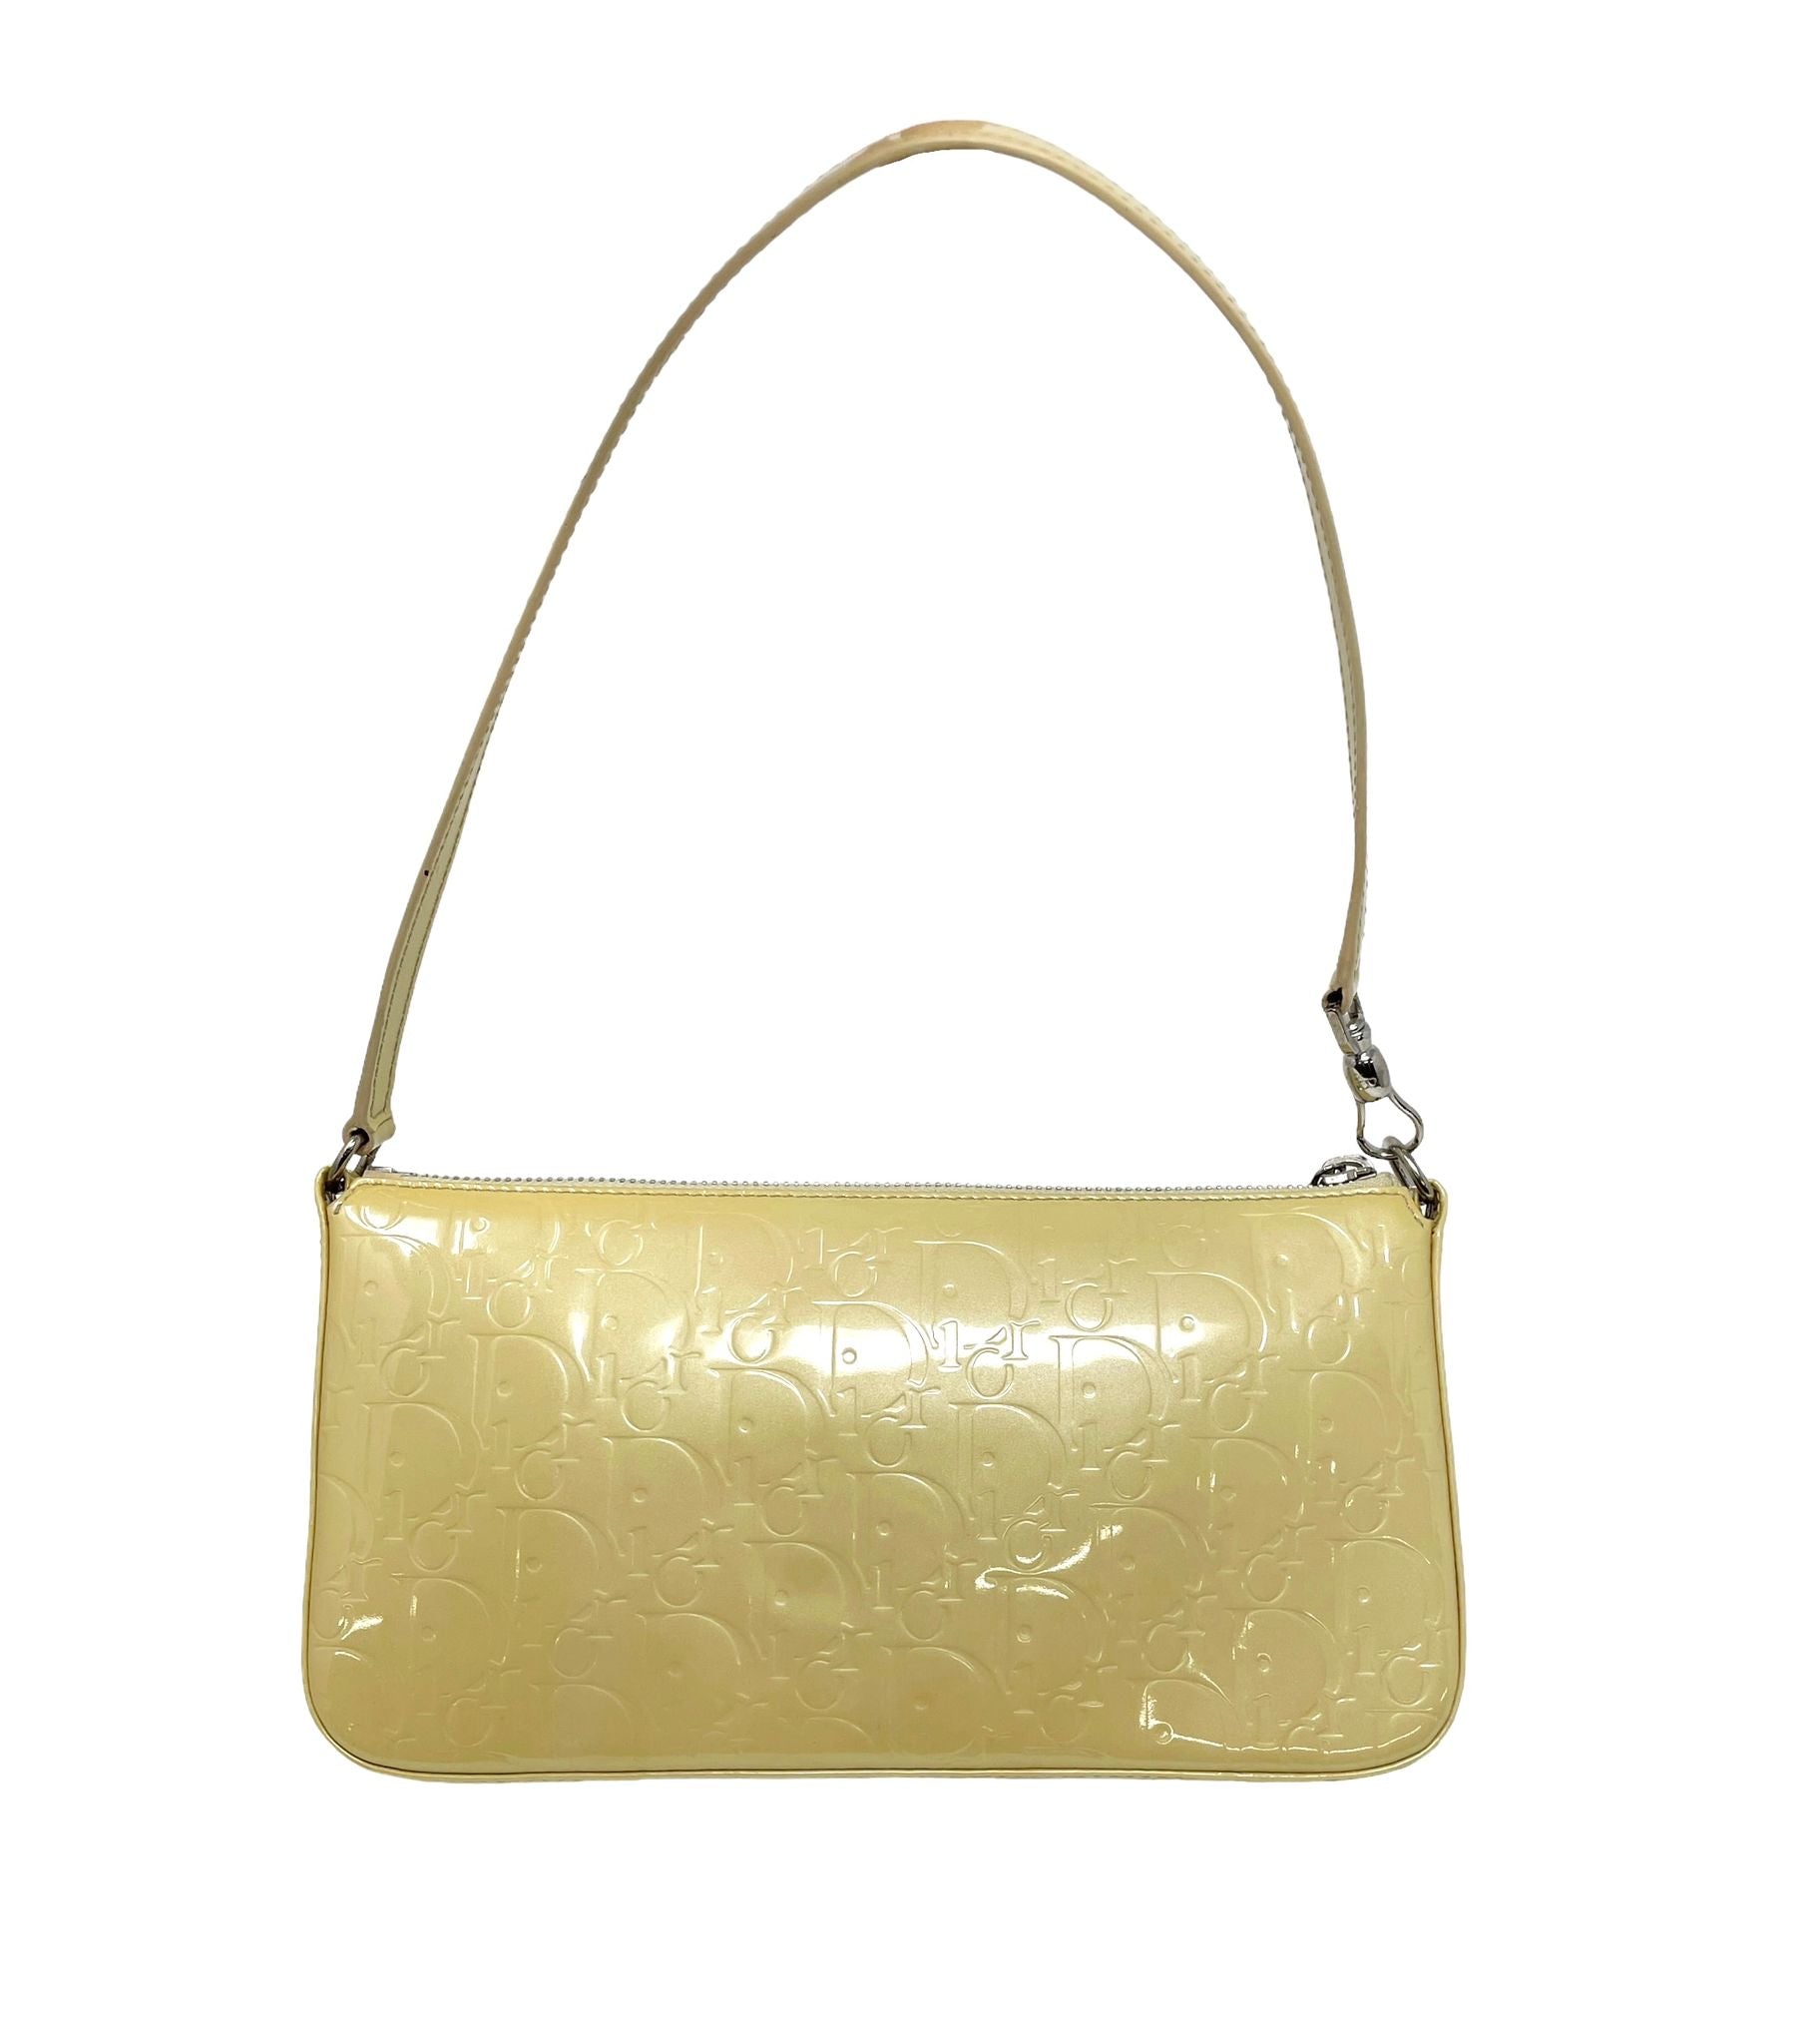 Louis Vuitton - Authenticated Thompson Handbag - Yellow for Women, Very Good Condition